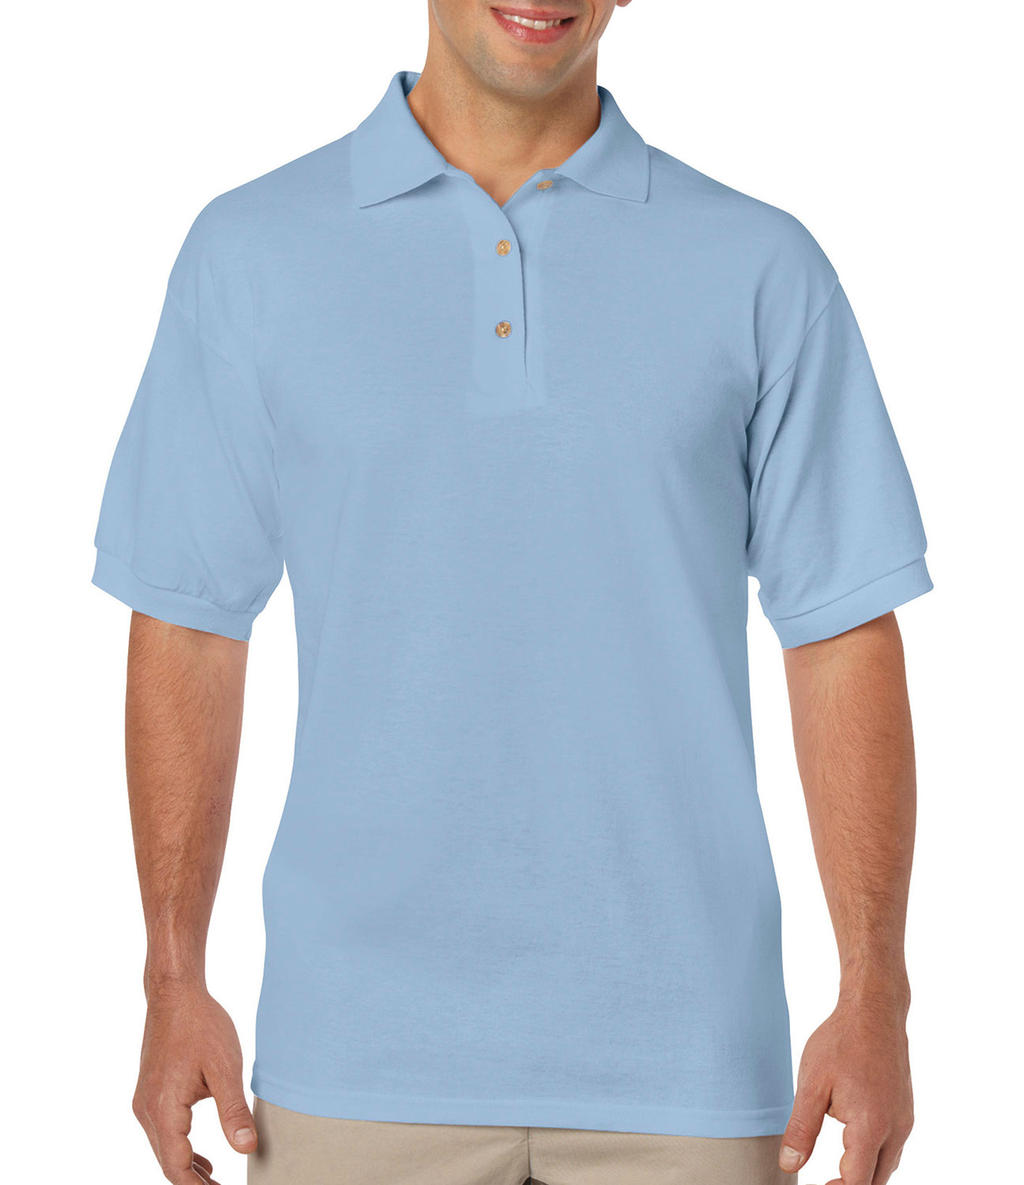  DryBlend Adult Jersey Polo in Farbe Light Blue